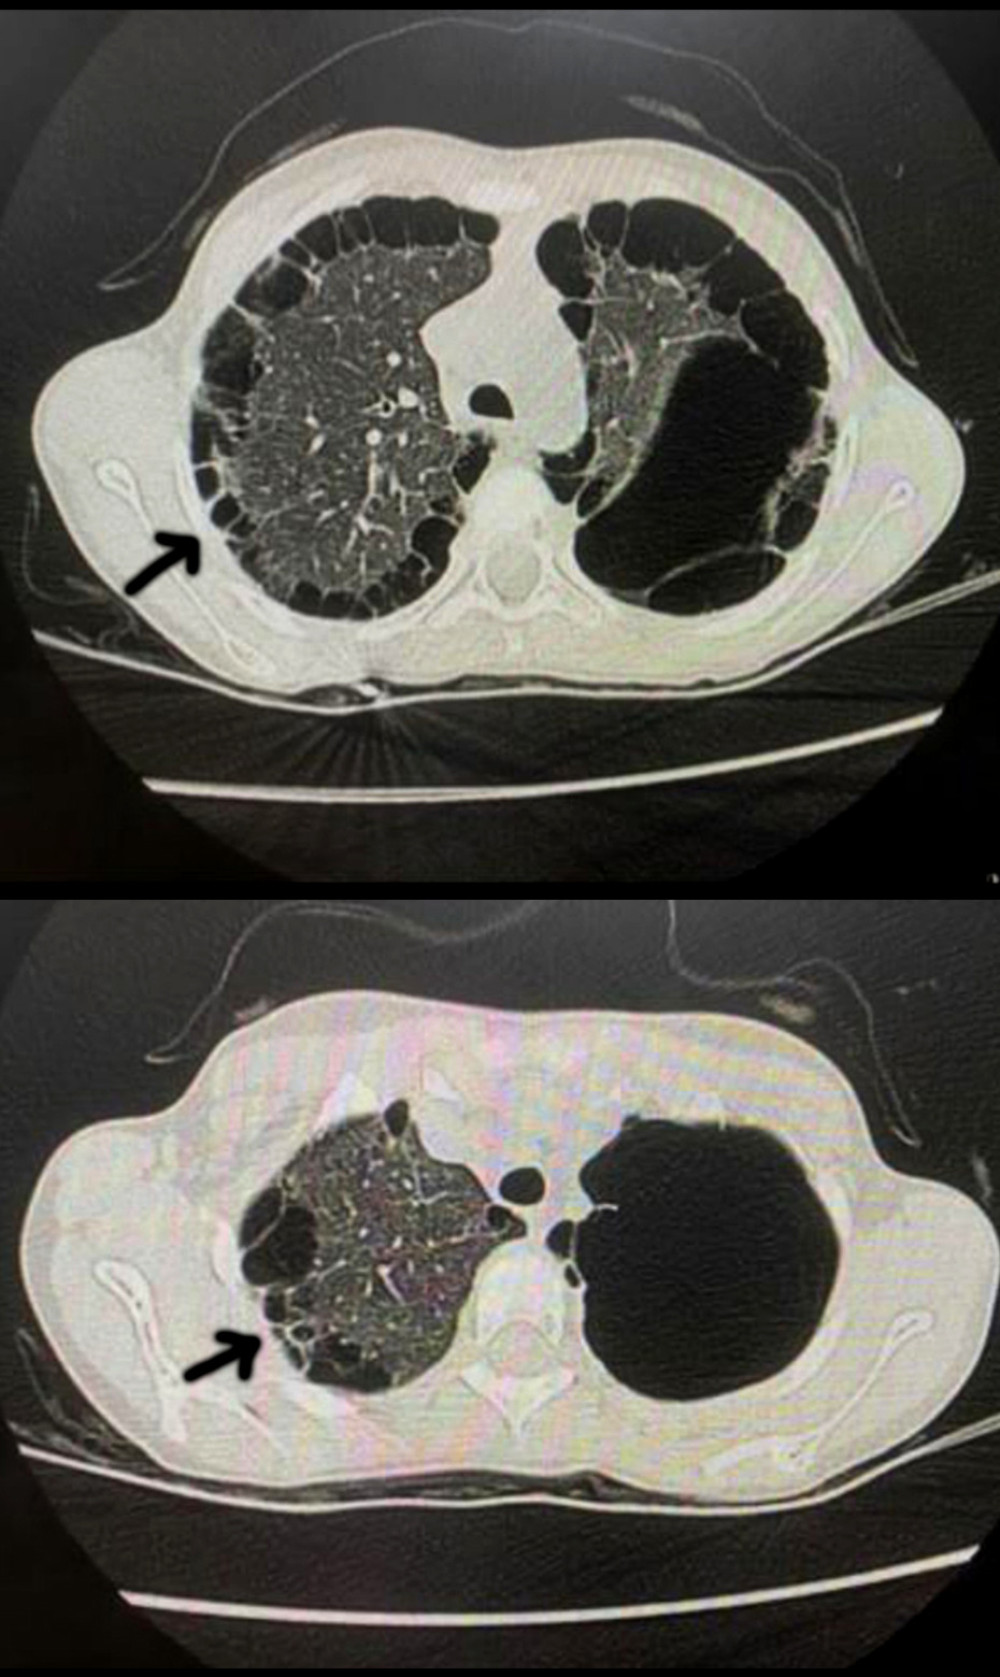 Axial chest CTs at different levels showing numerous subpleural (black arrows) and intraparenchymal lung cysts, worse on the left upper lobe.